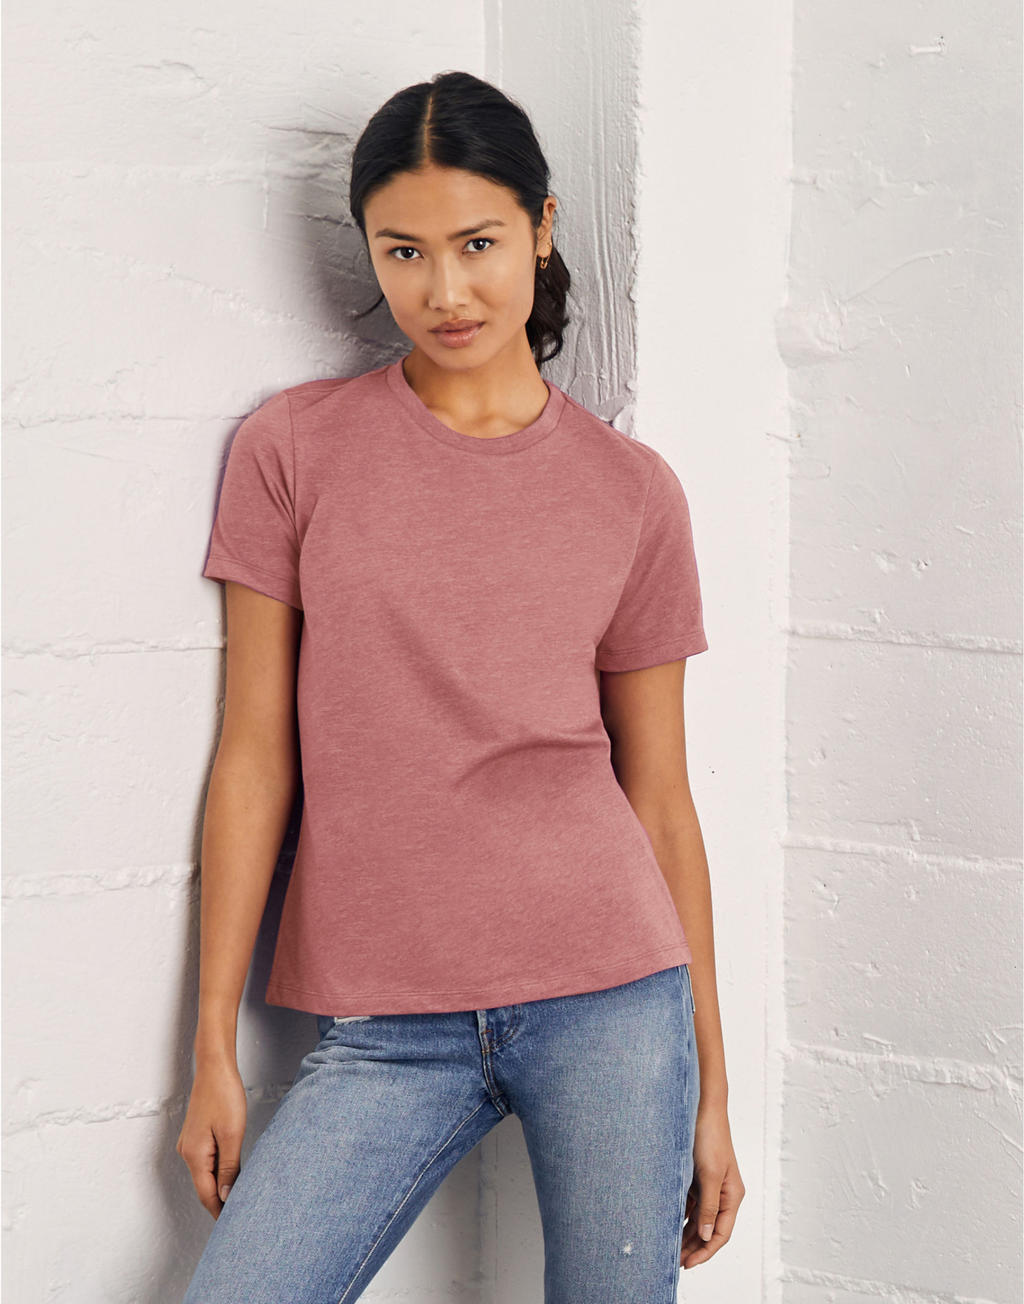 Cotton T-Shirt - Stibb Green - Ashby-in-the-Water